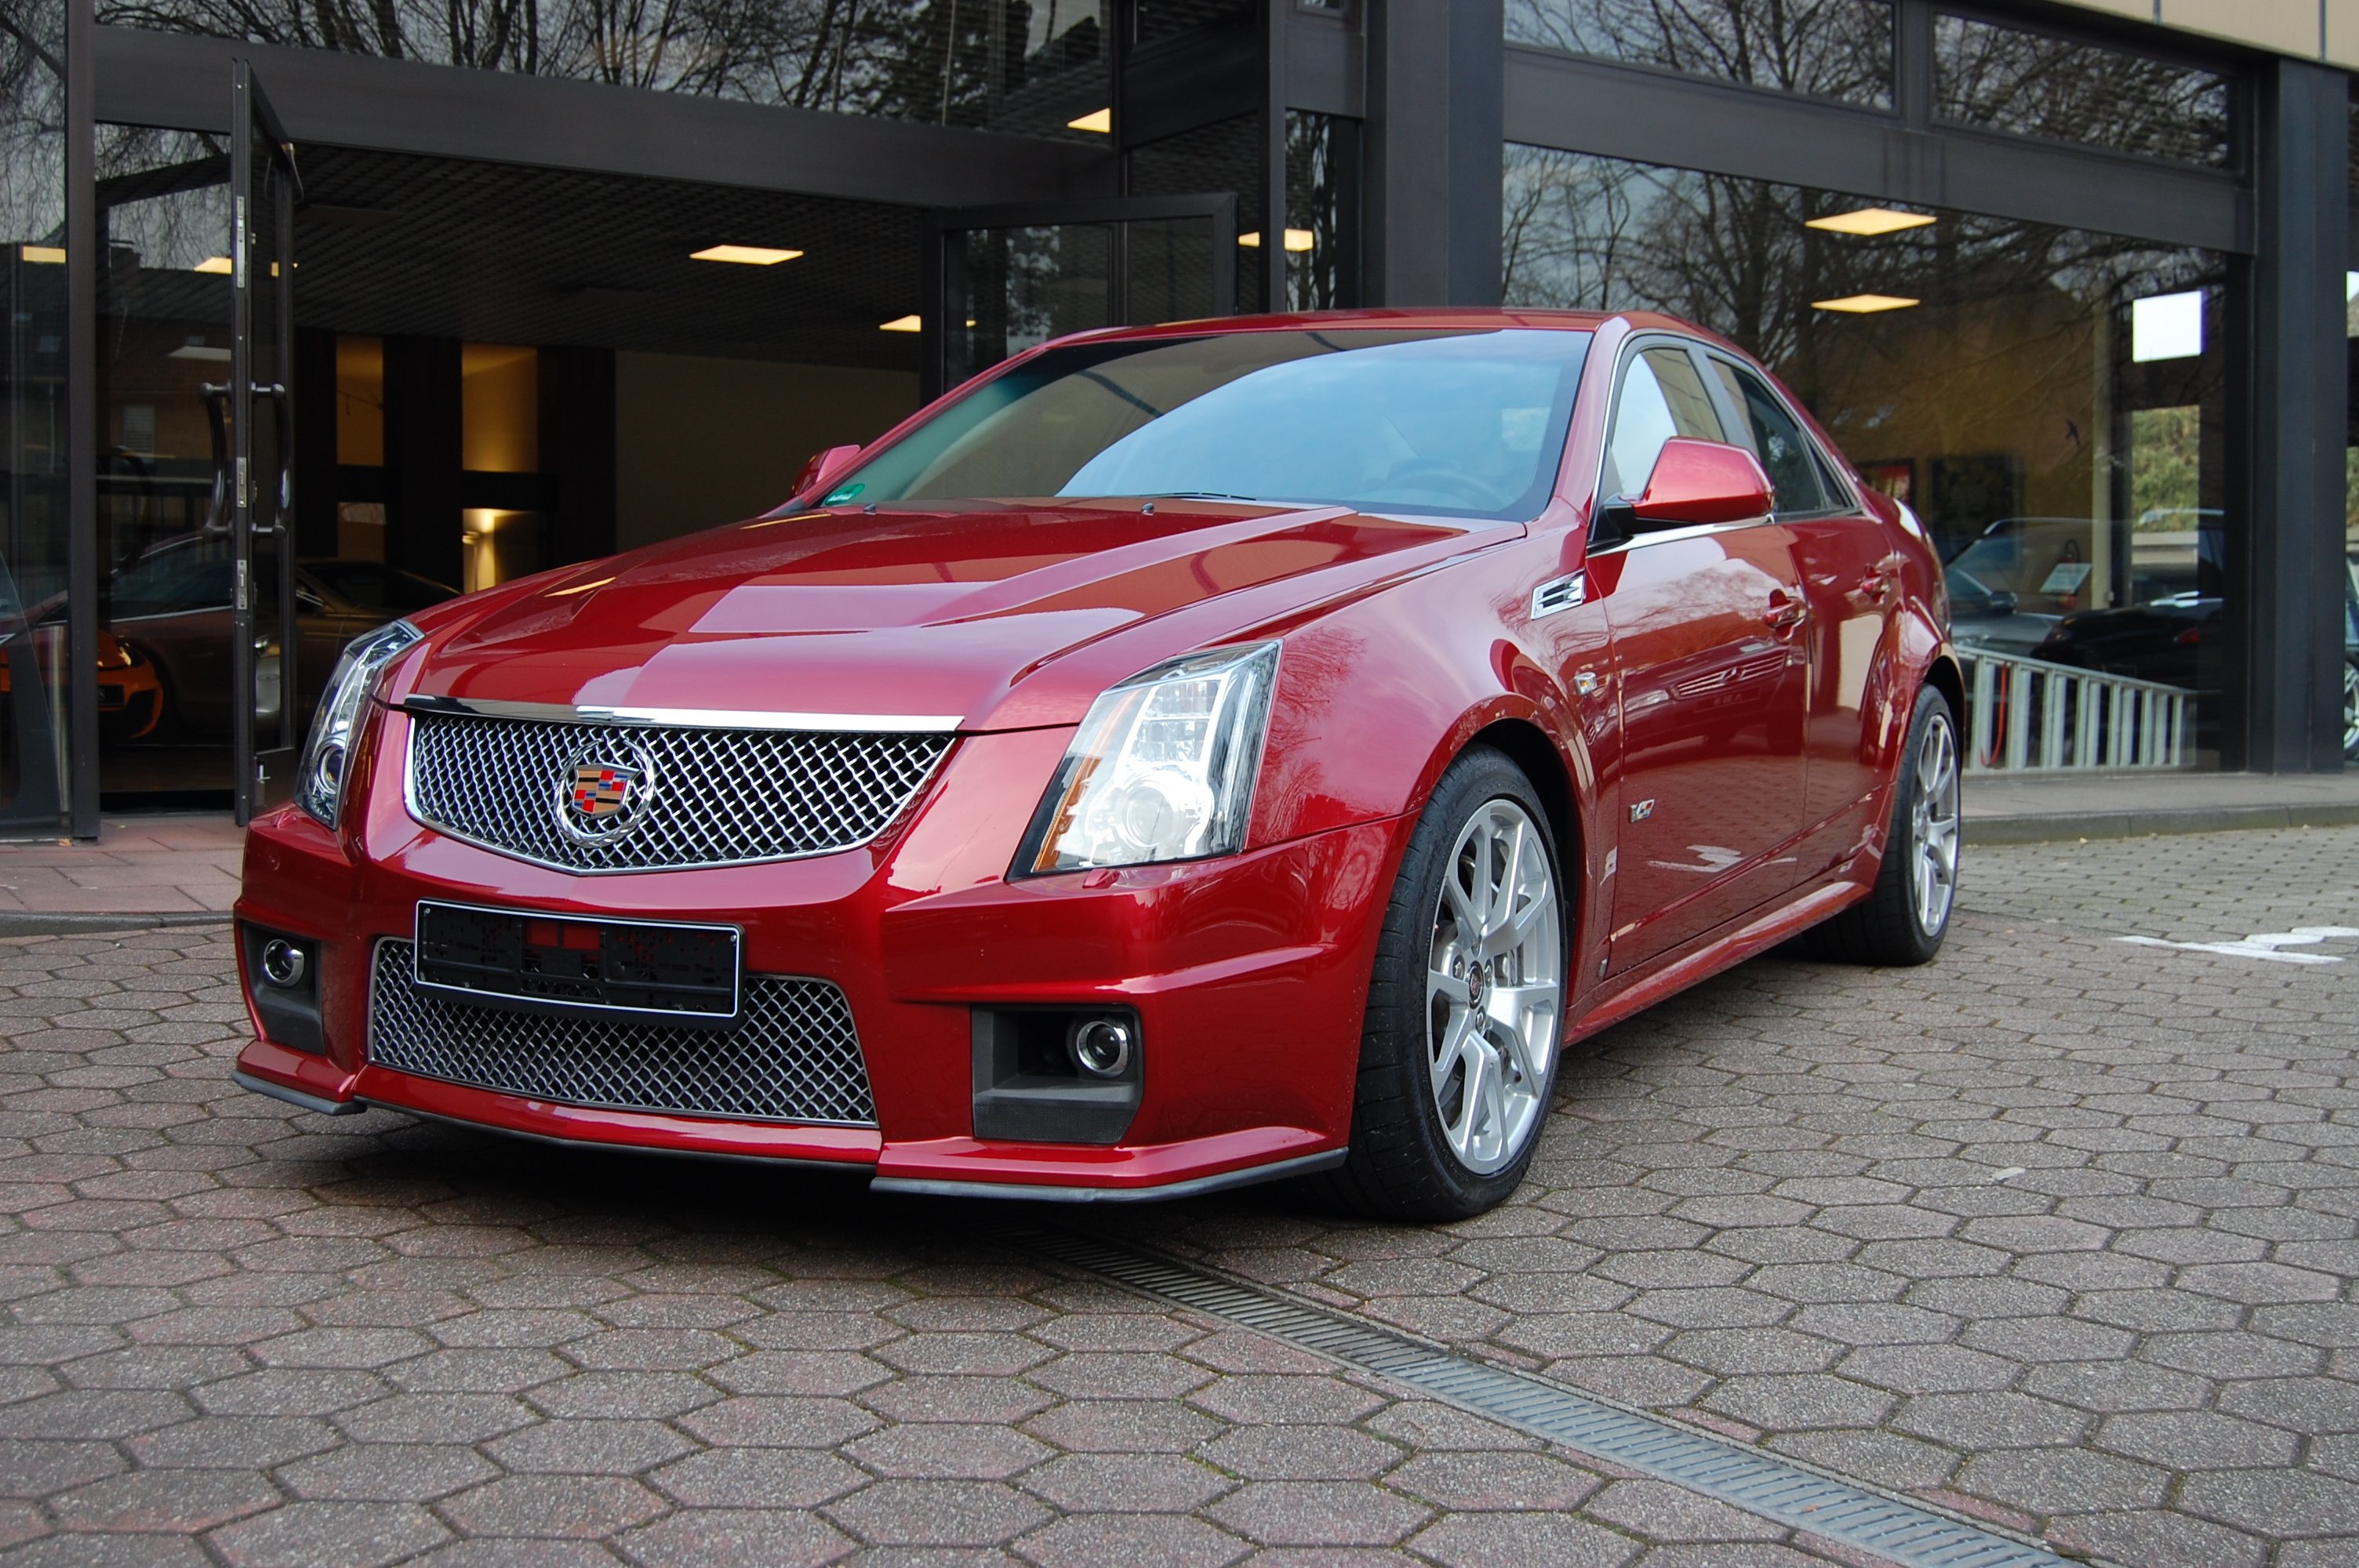 2010, Cadillac, Cts v, 6, 2, Supercharged, Europamodell, Cts, Luxury, Muscle Wallpaper